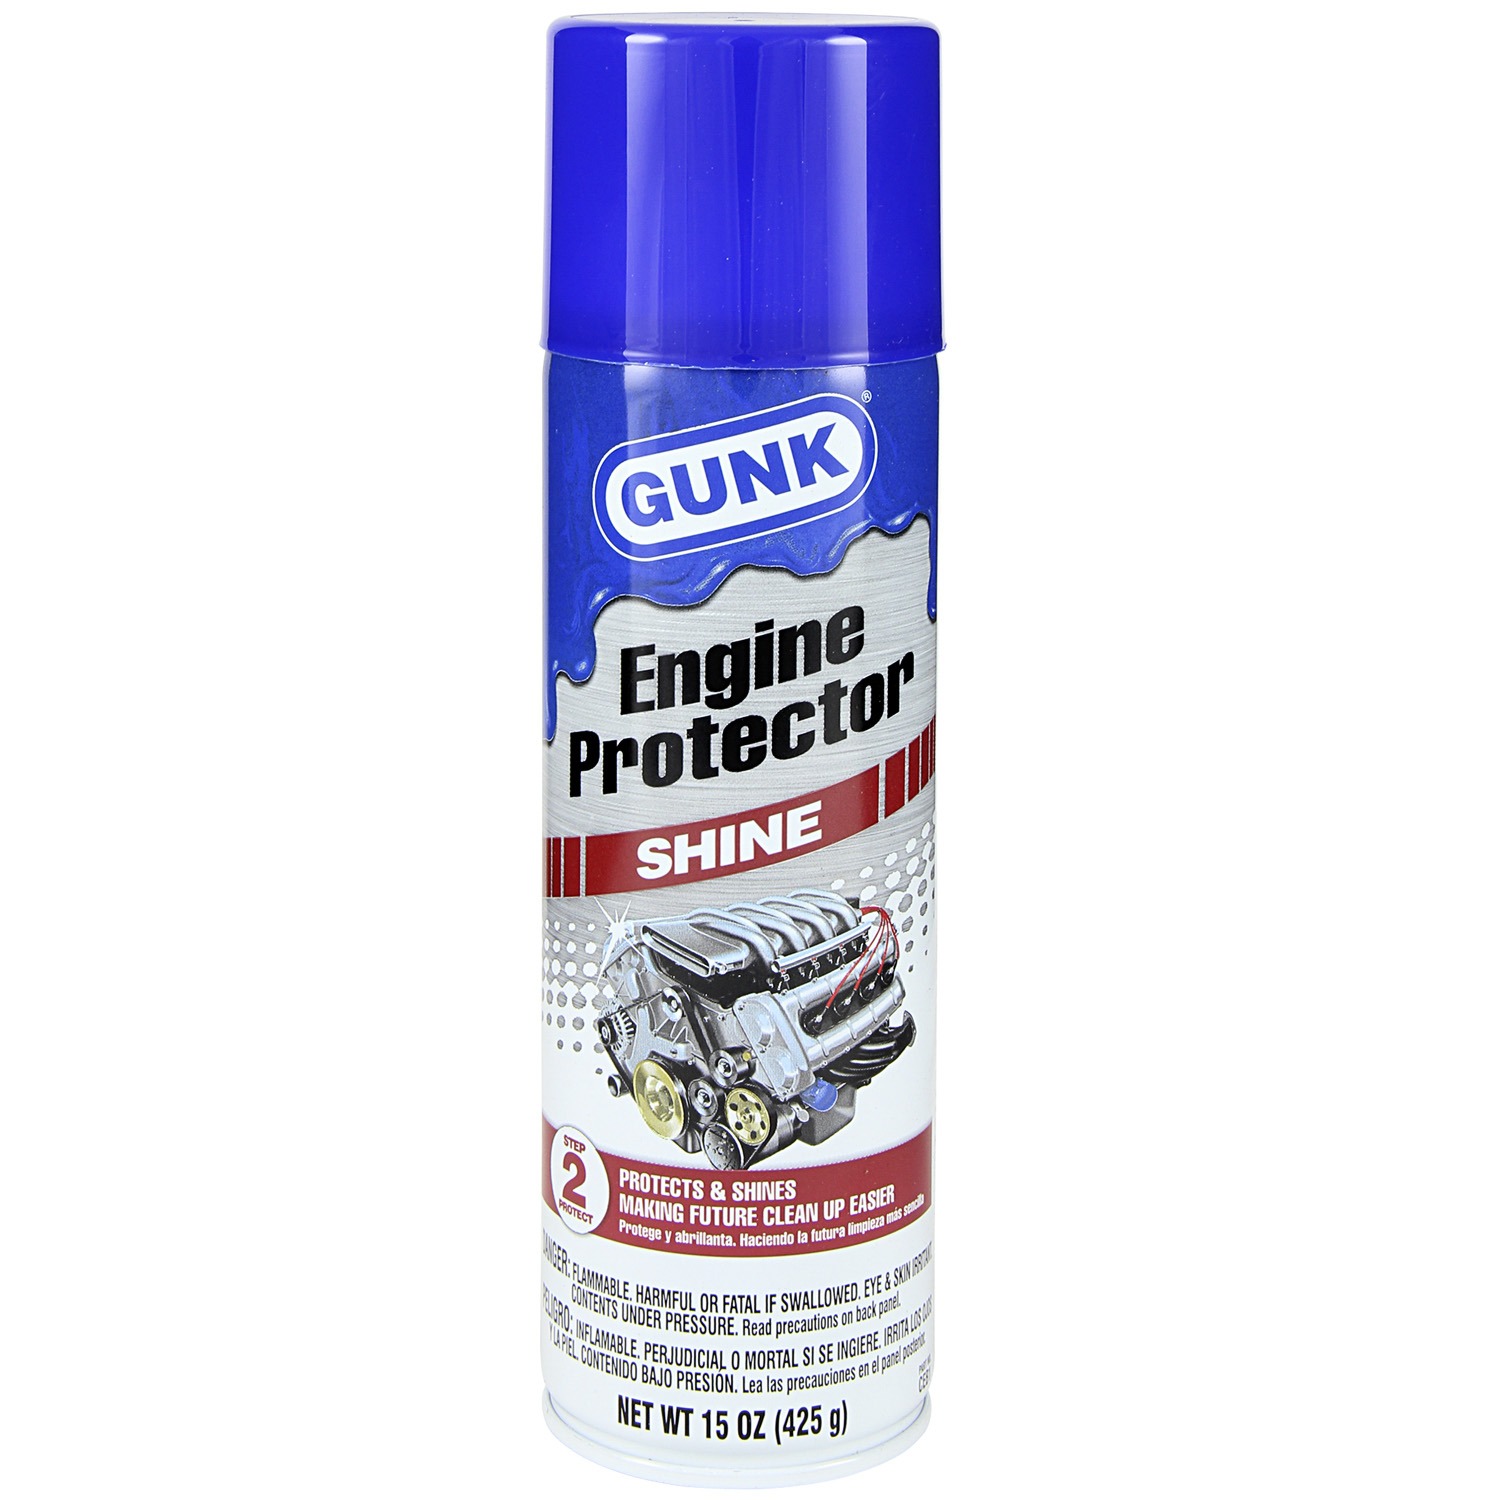 GUNK on X: CLEAN & PROTECT with GUNK Engine Degreasers & Protector. 2 for  $7 through March 30 @oreillyauto! Clean engines run cooler, stay cleaner  and last longer.   / X